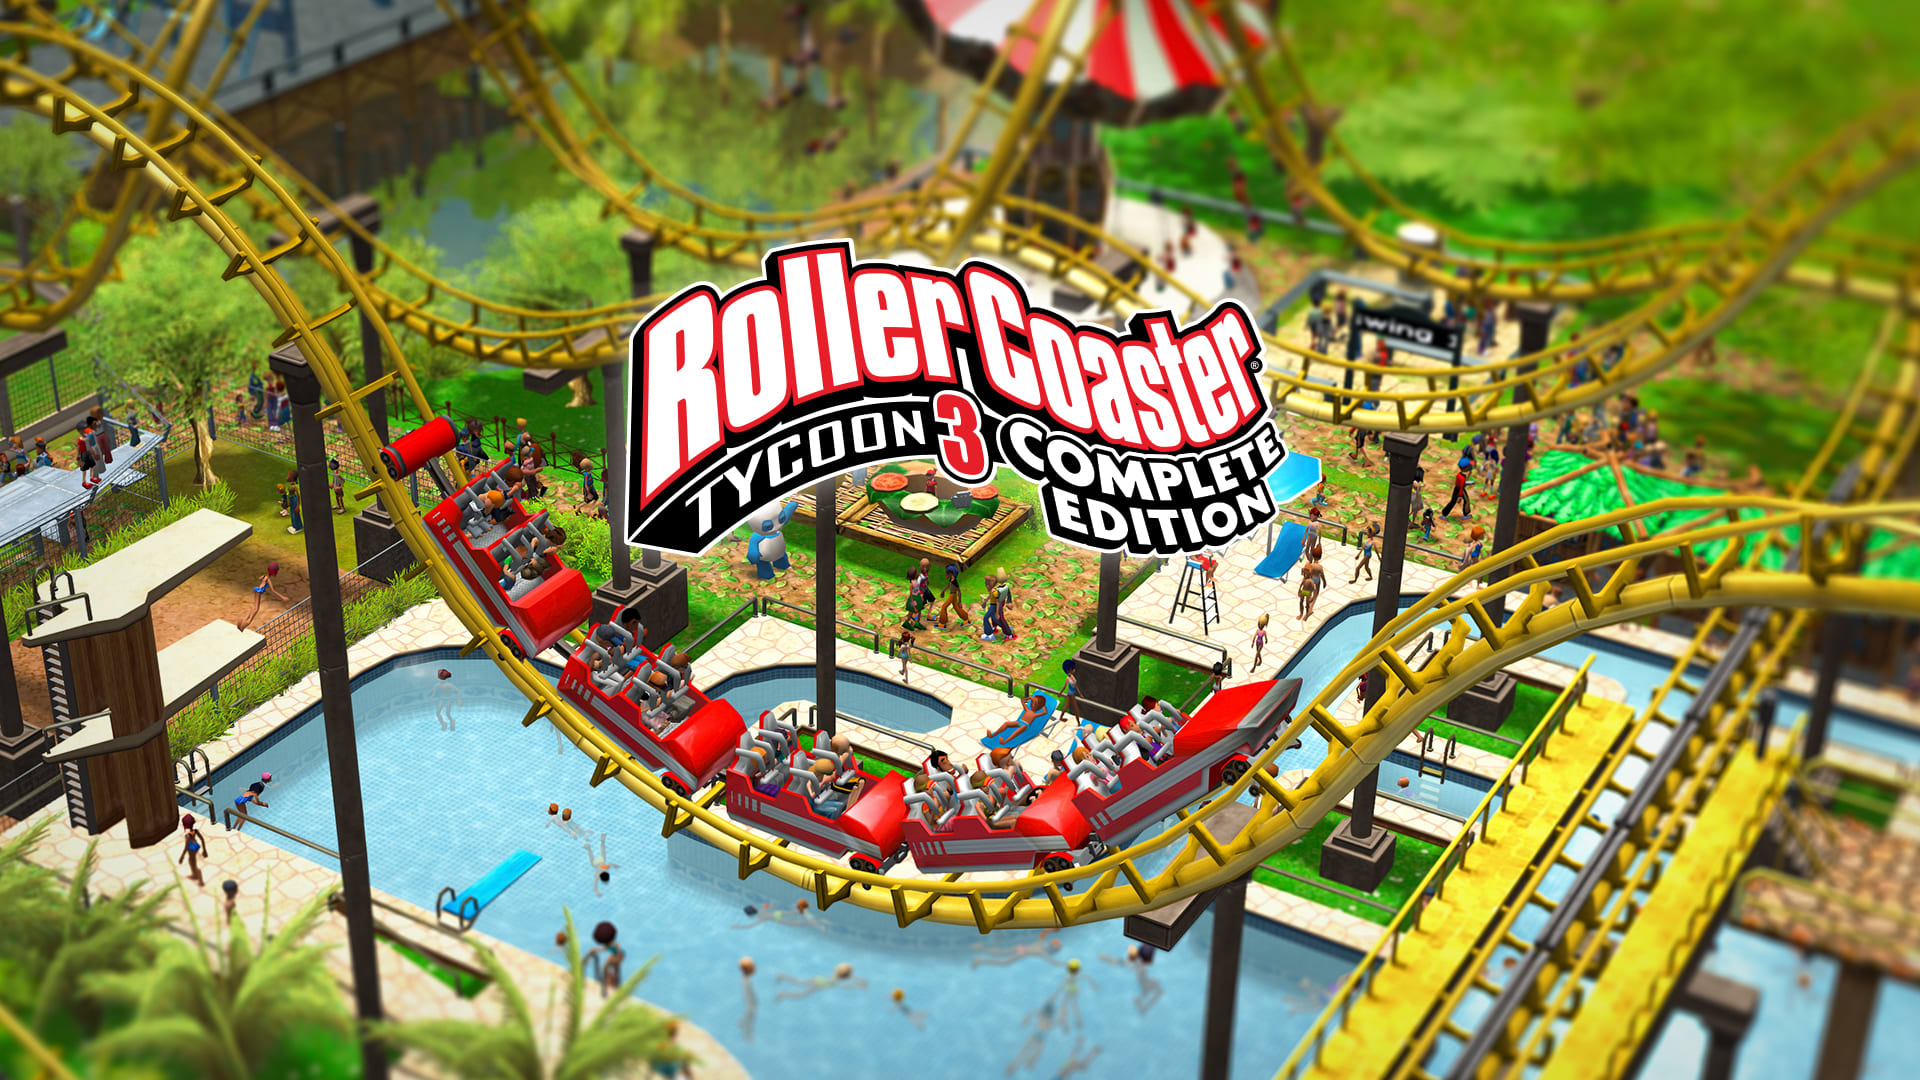 RollerCoaster Tycoon 3 - Édition complète 1